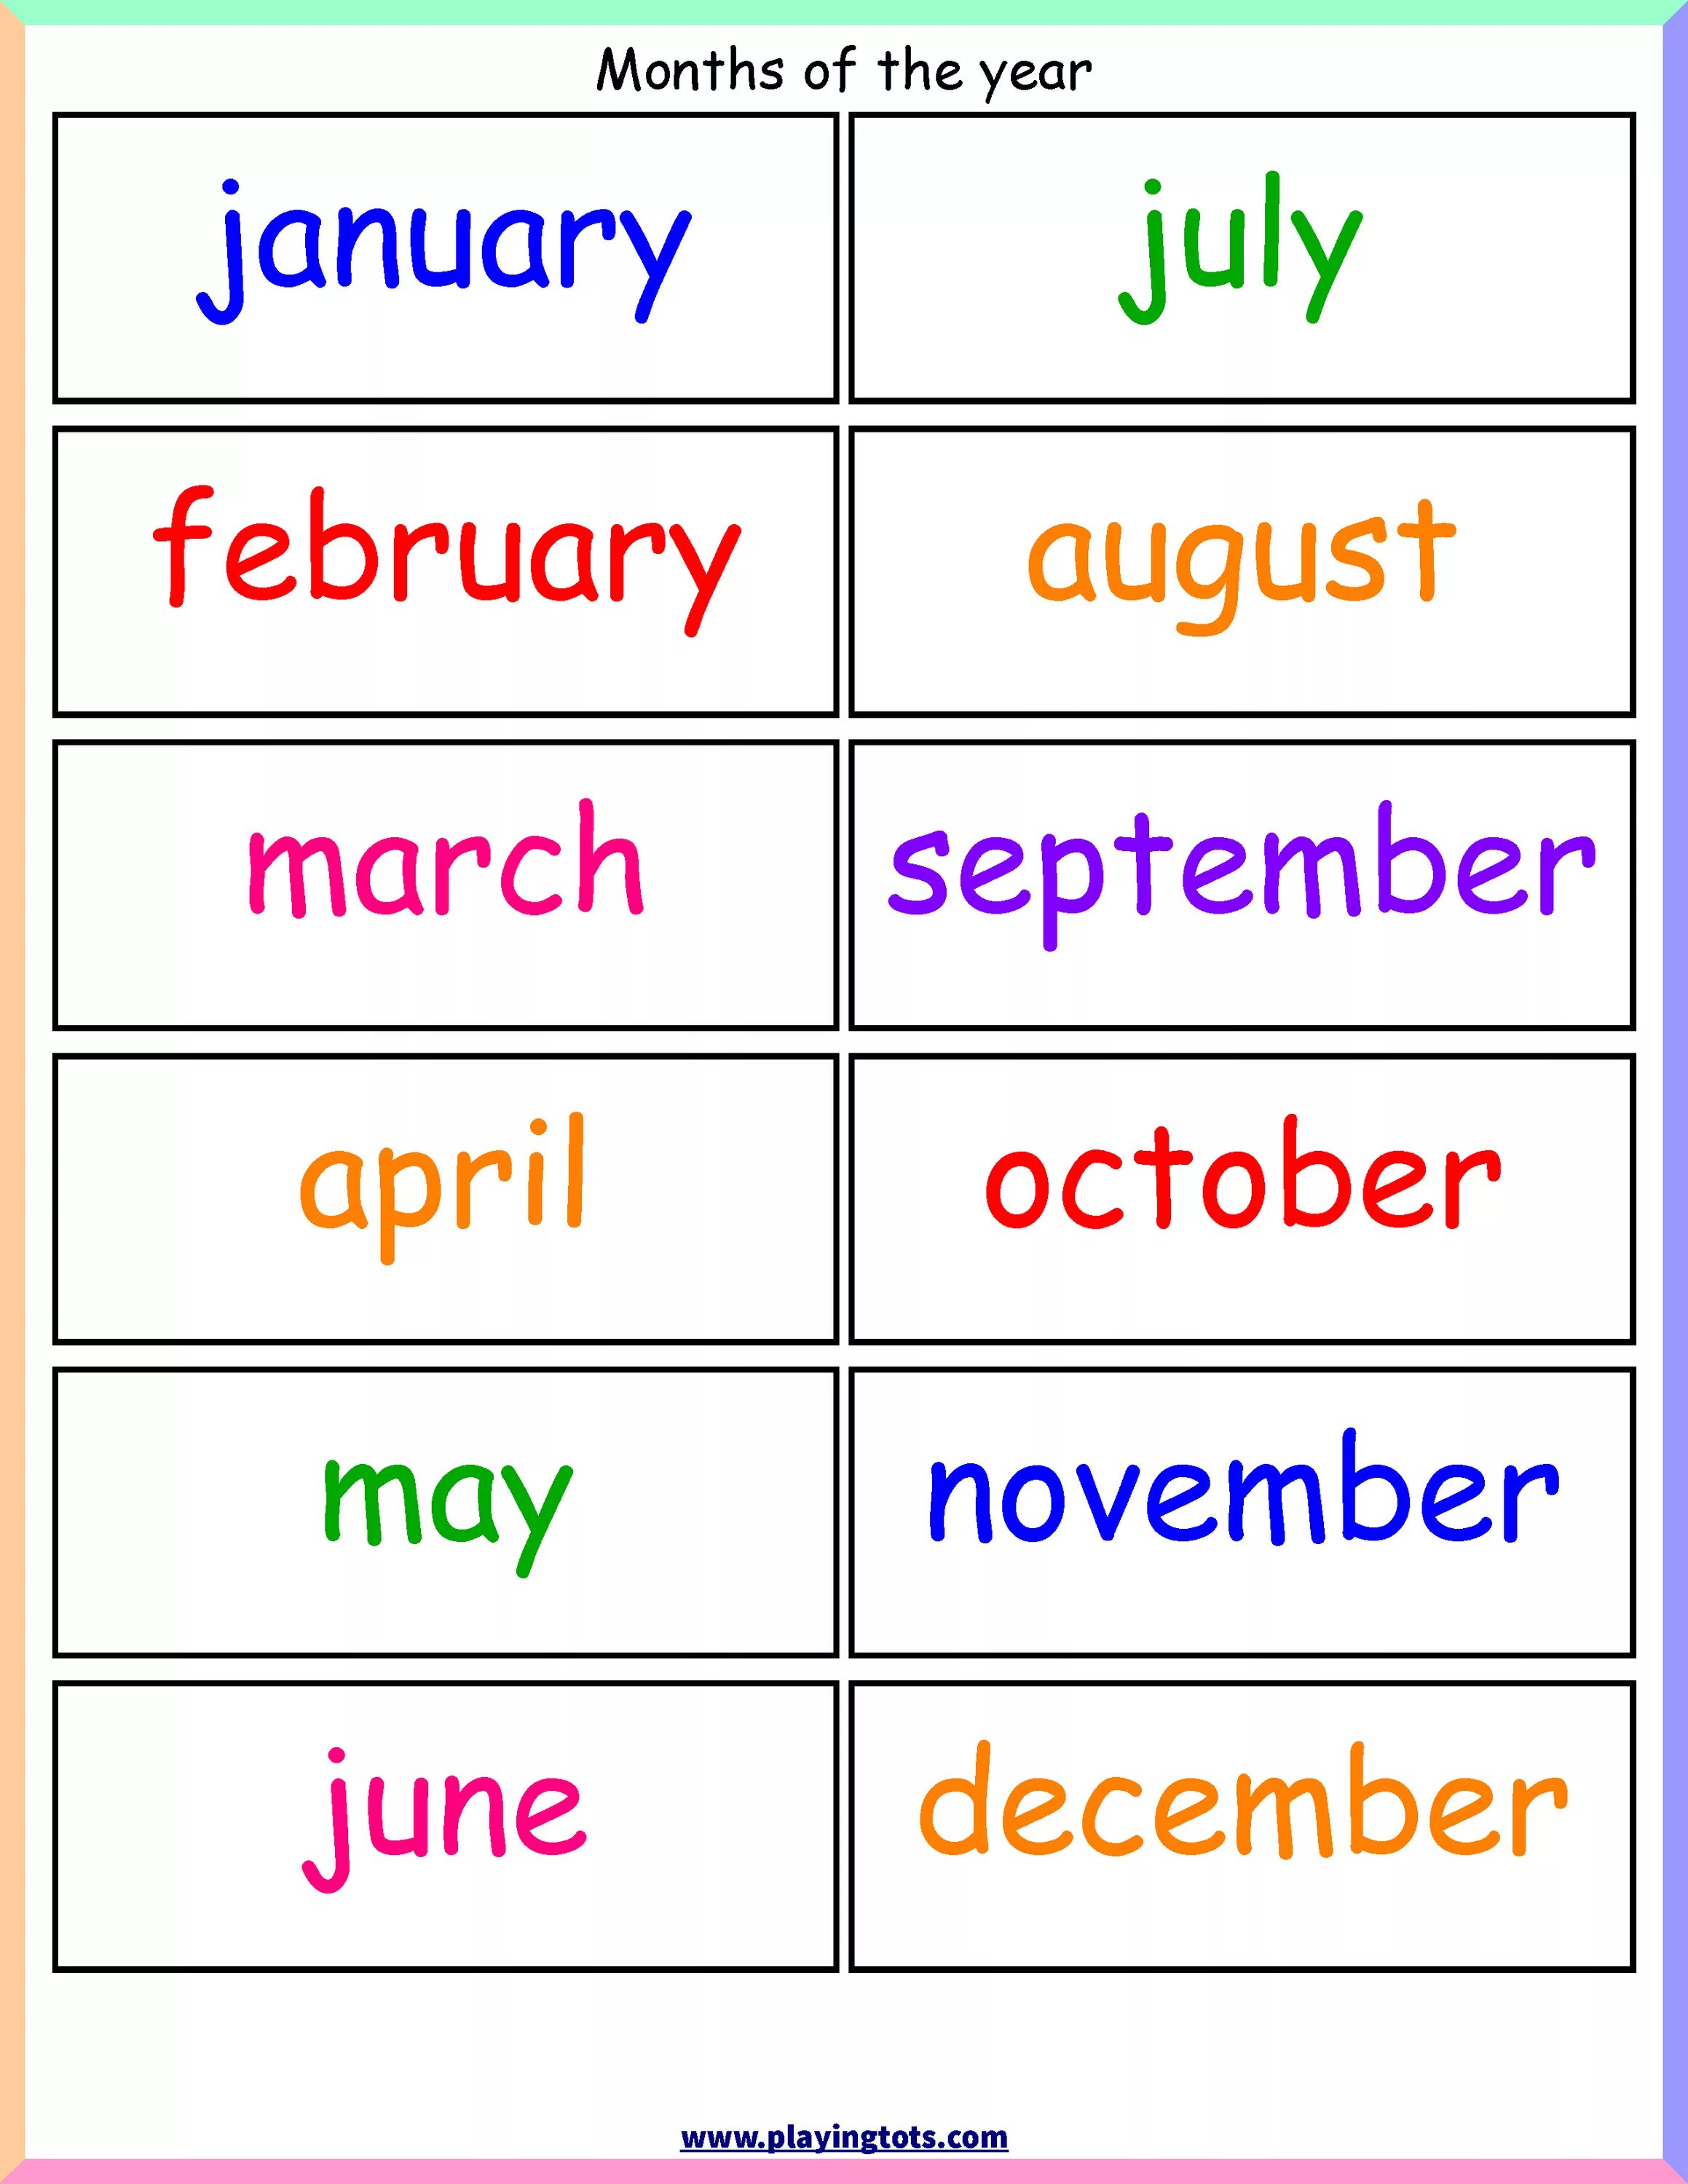 Months of the year for kids. Months of the year карточка. Months in English. English months for Kids. Месяца на английском.